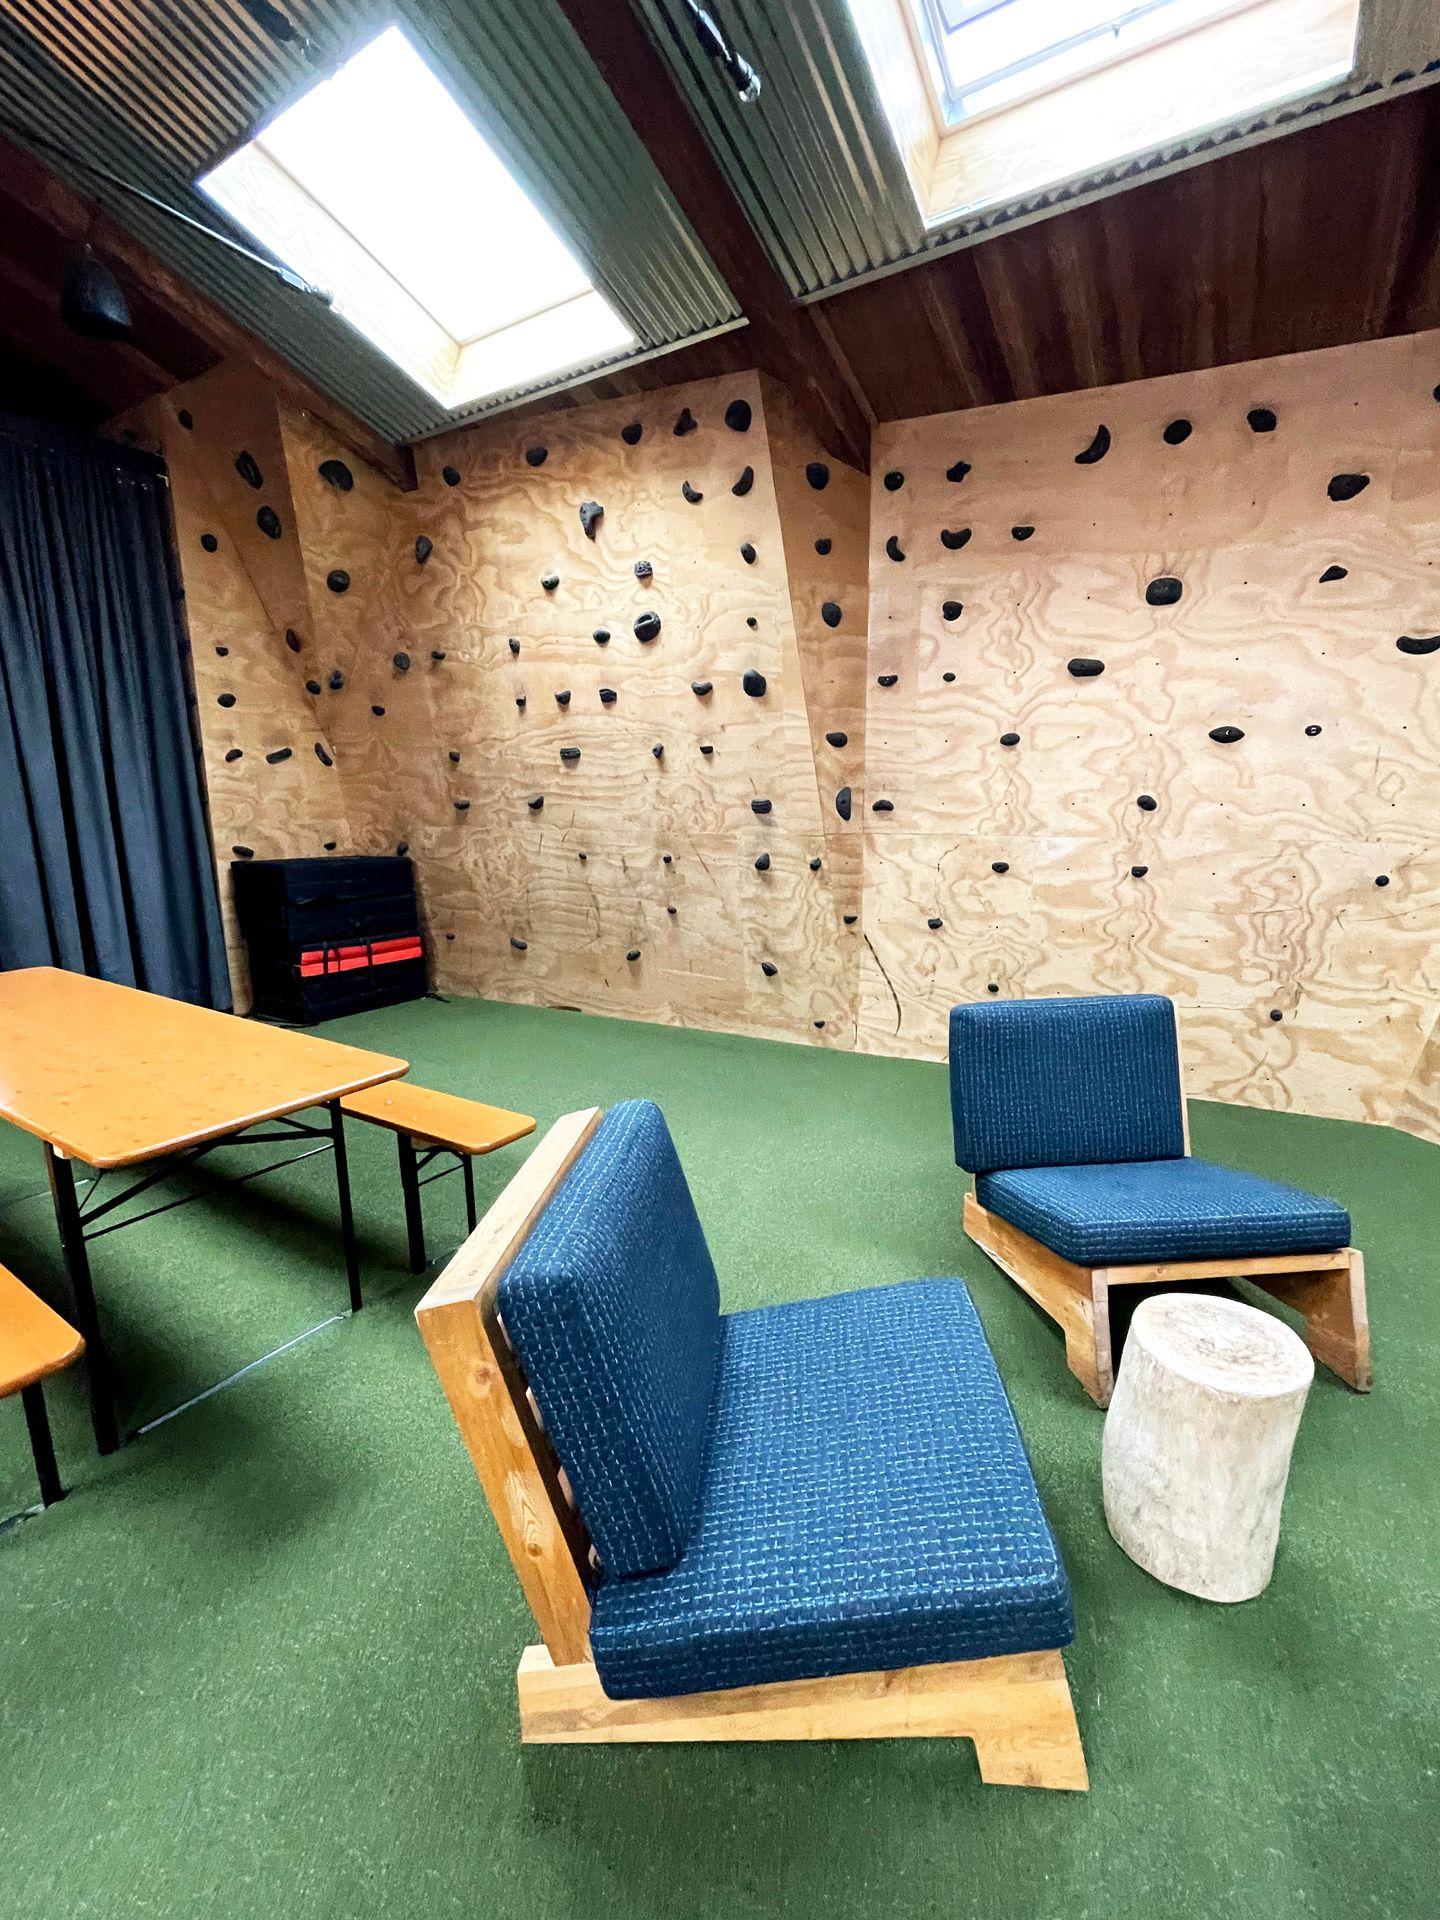 A lobby area of Basecamp Boulder with a rock climbing wall.